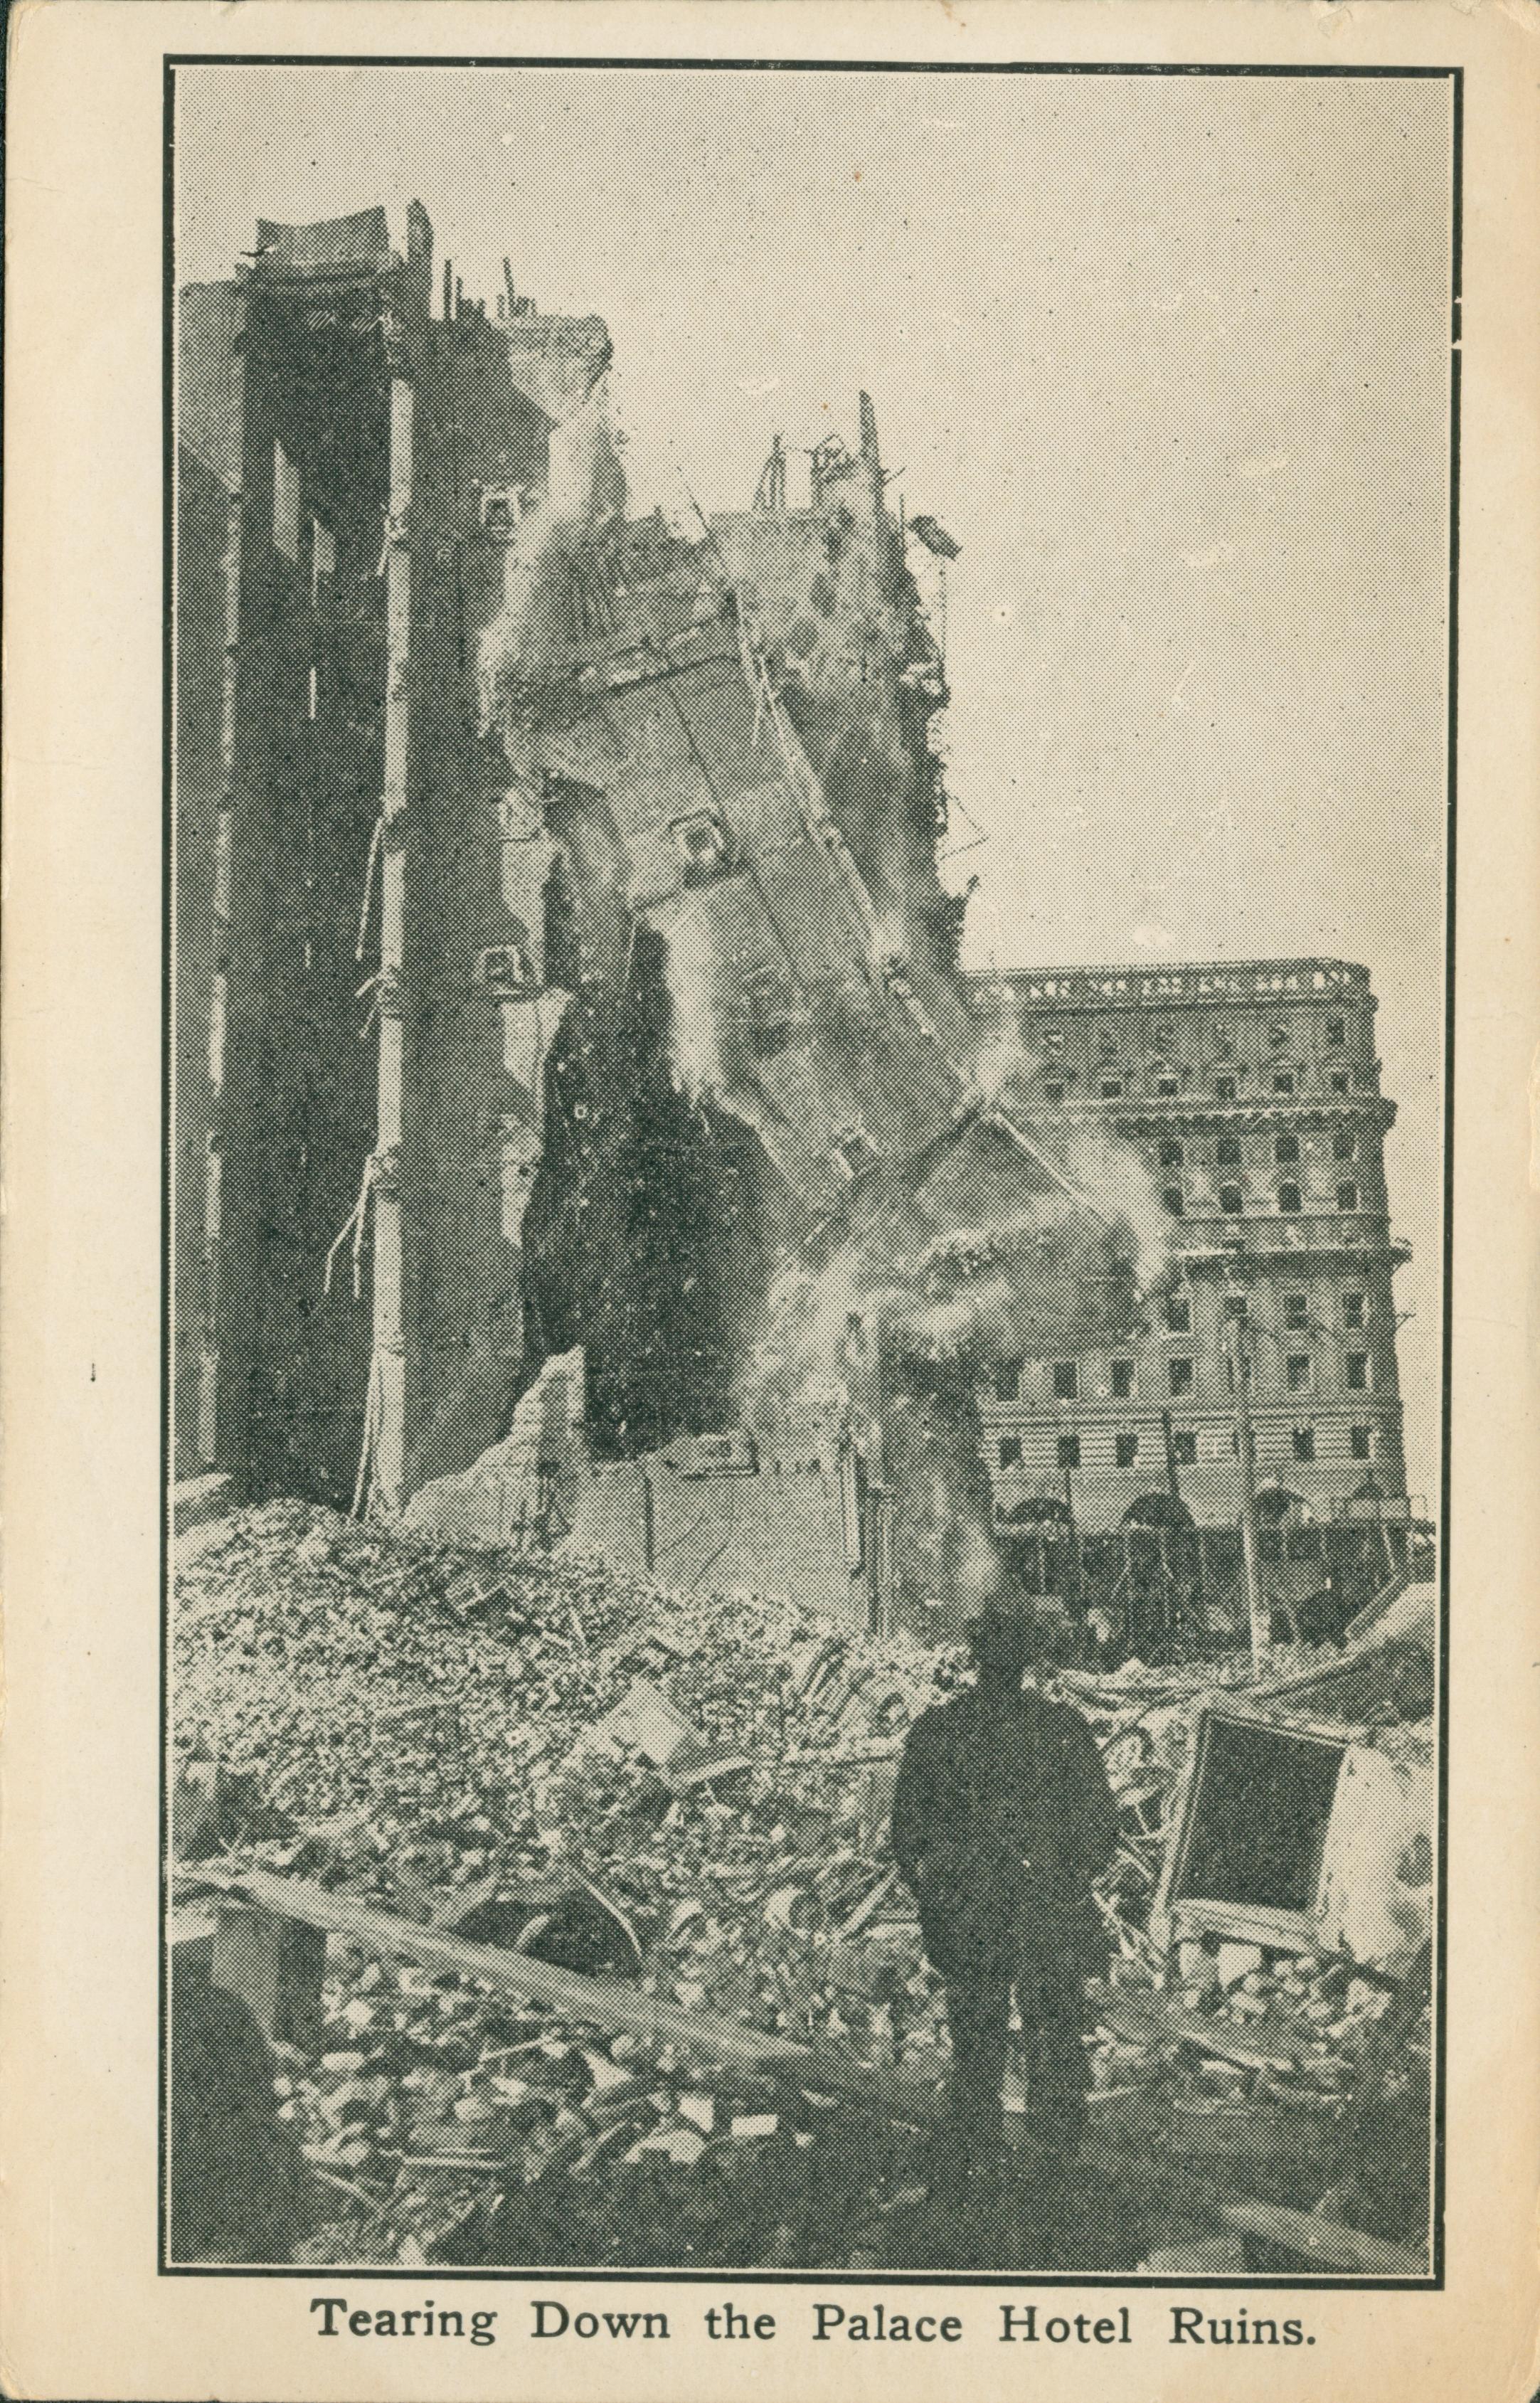 Shows a man watching a building collapsing.